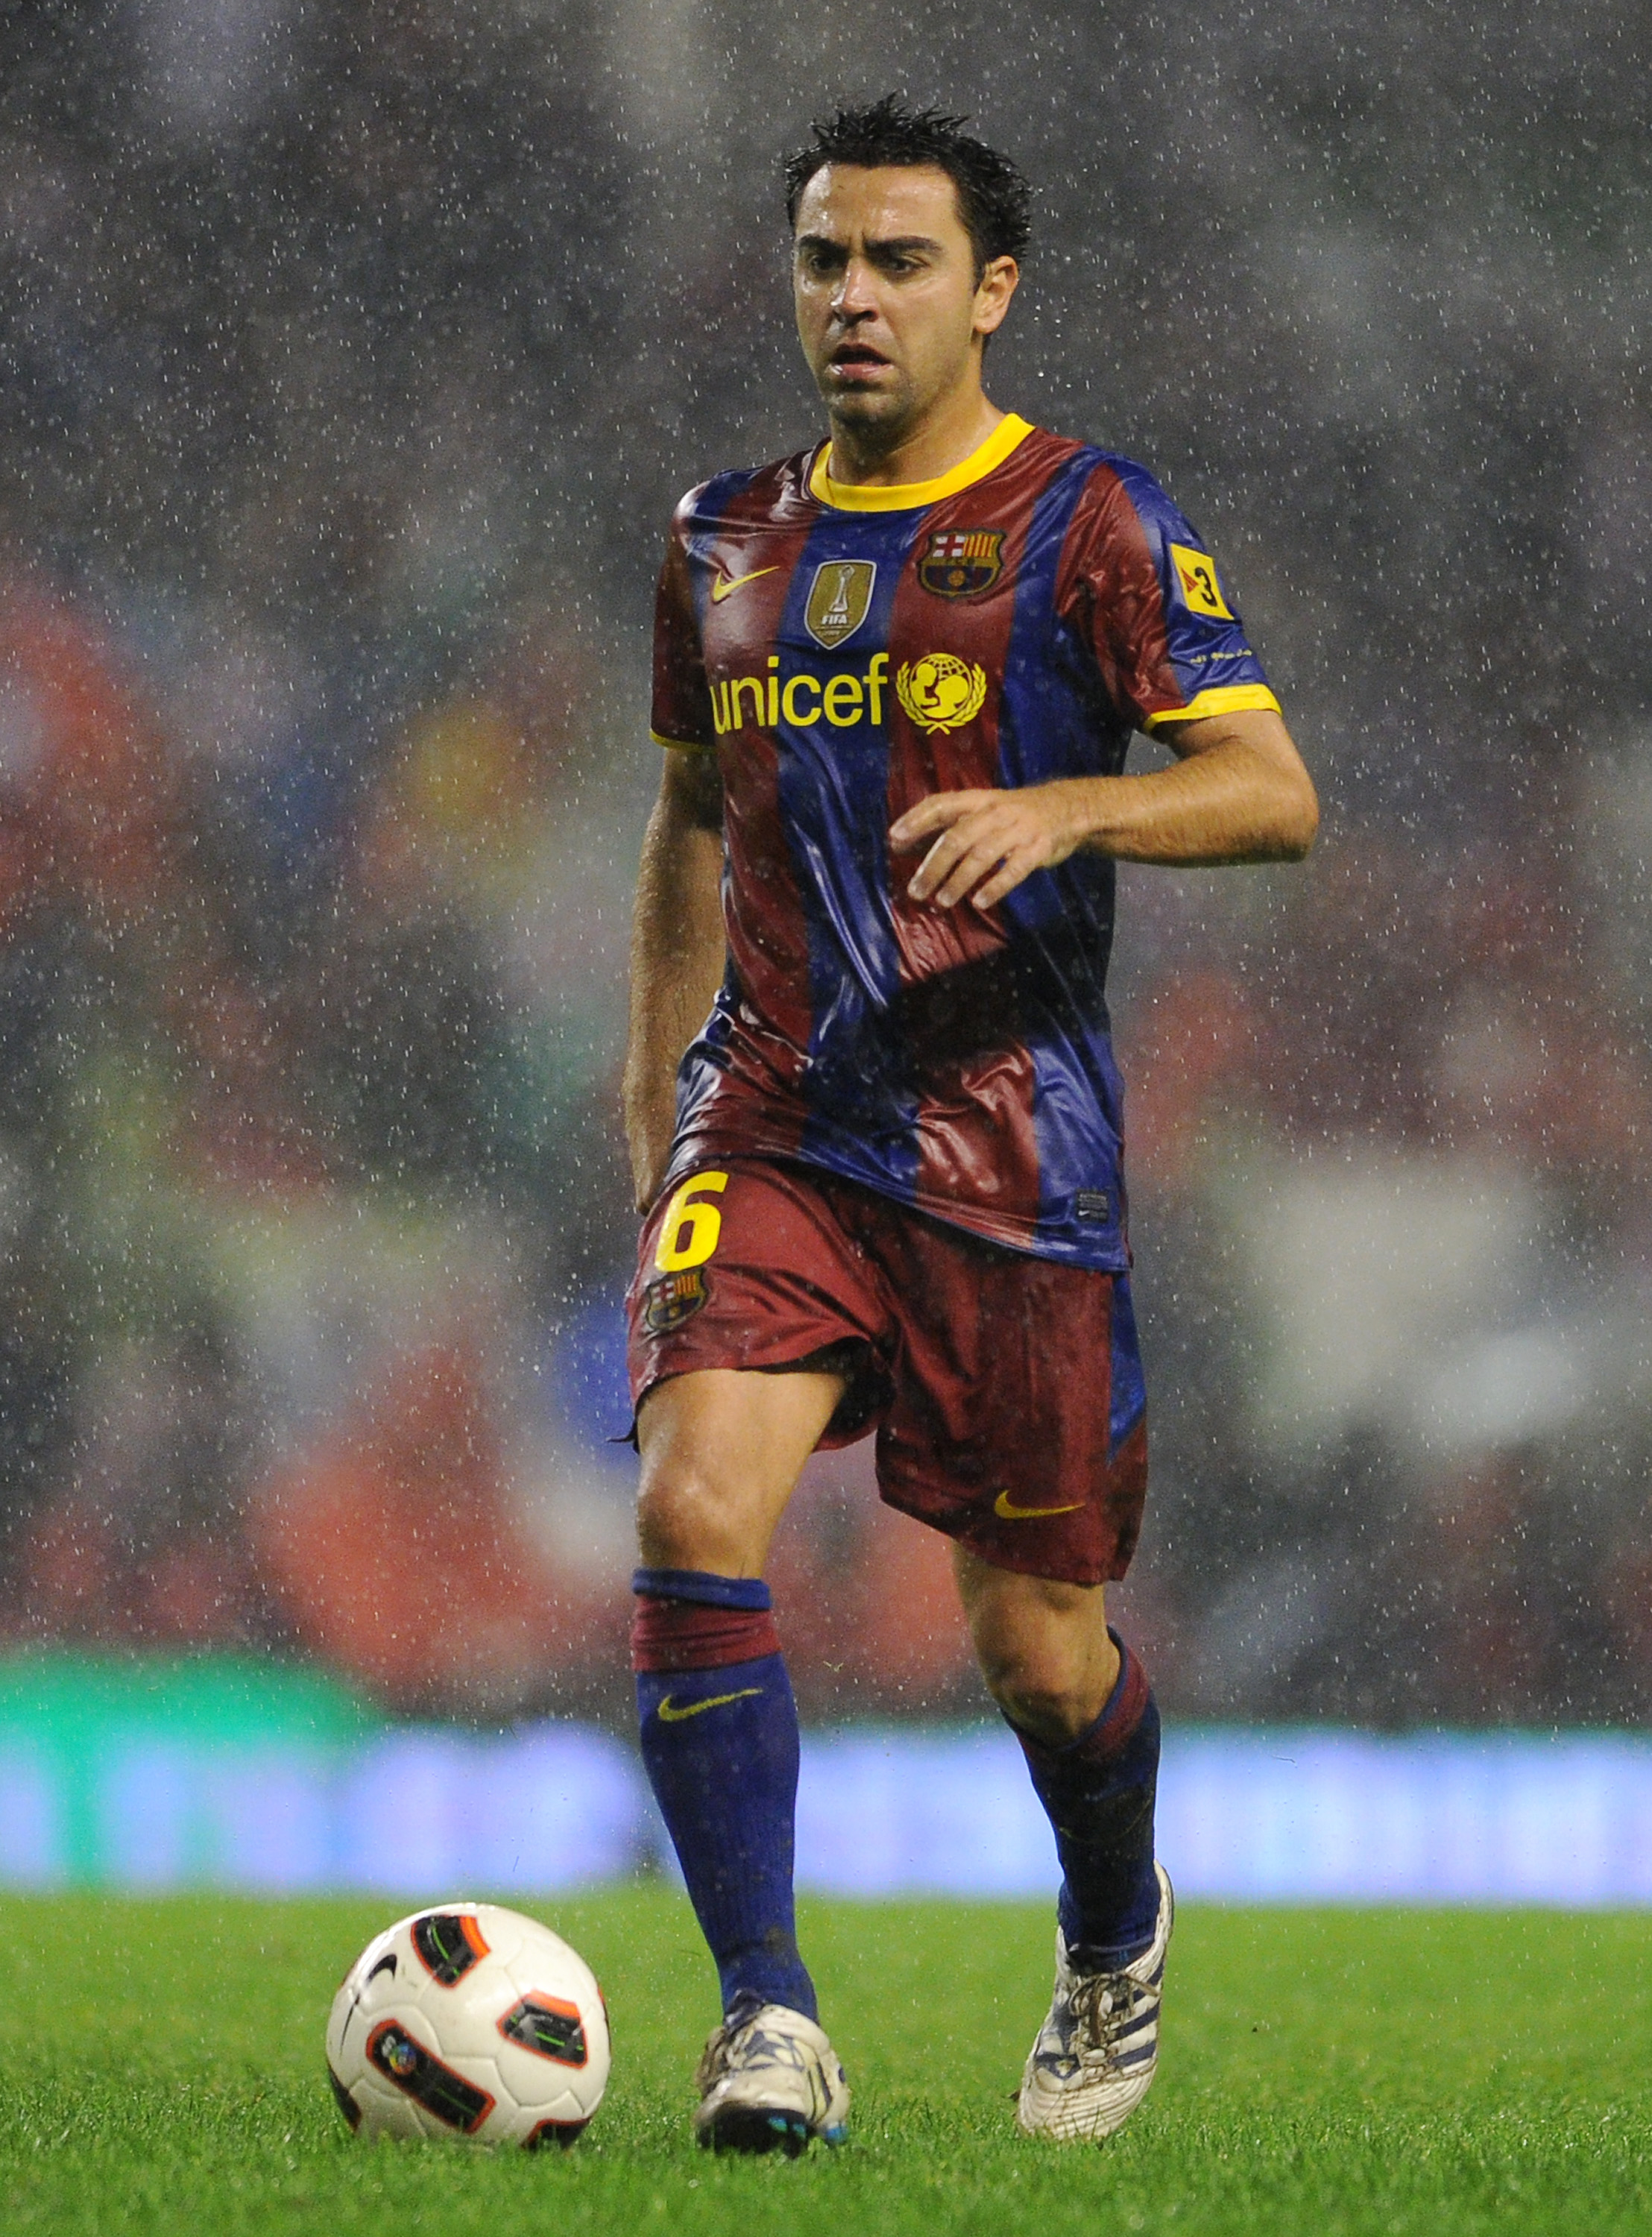 BILBAO, SPAIN - SEPTEMBER 25:  Xavi Hernandez of Barcelona runs with the ball during the La Liga match between Athletic Bilbao and Barcelona at the San Mames Stadium on September 25, 2010 in Bilbao, Spain. Barcelona won the match 3-1.  (Photo by Jasper Ju